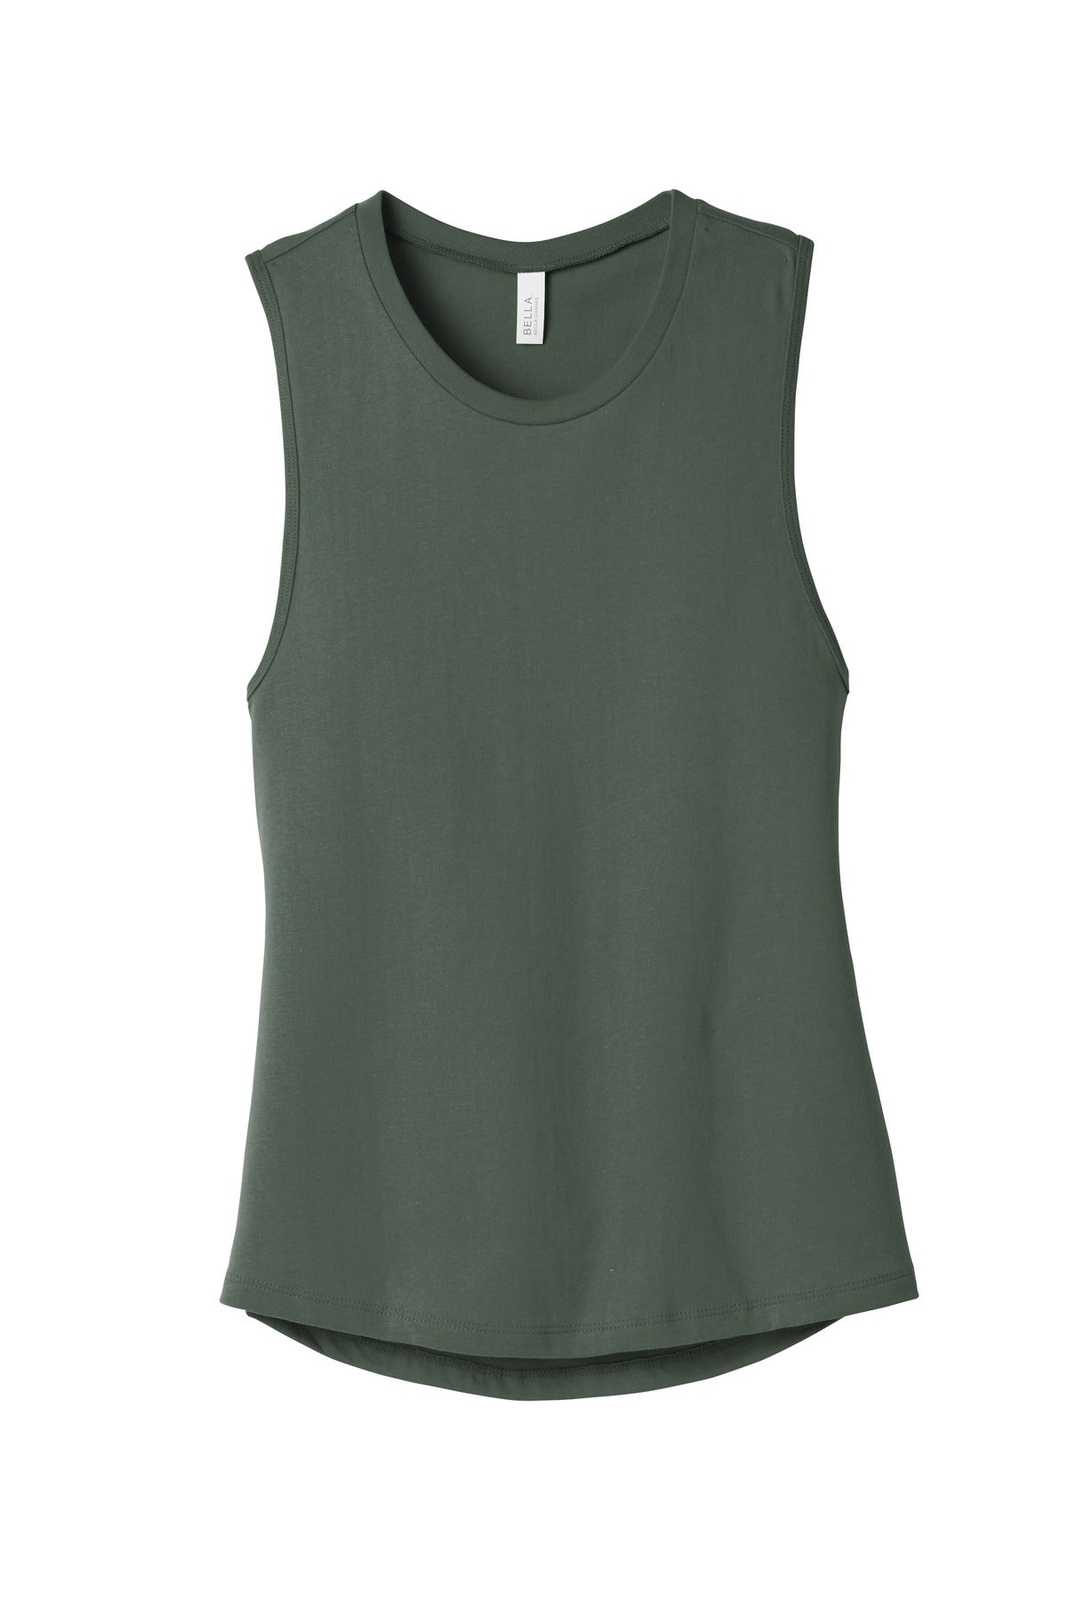 Bella + Canvas 6003 Women's Jersey Muscle Tank - Military Green - HIT a Double